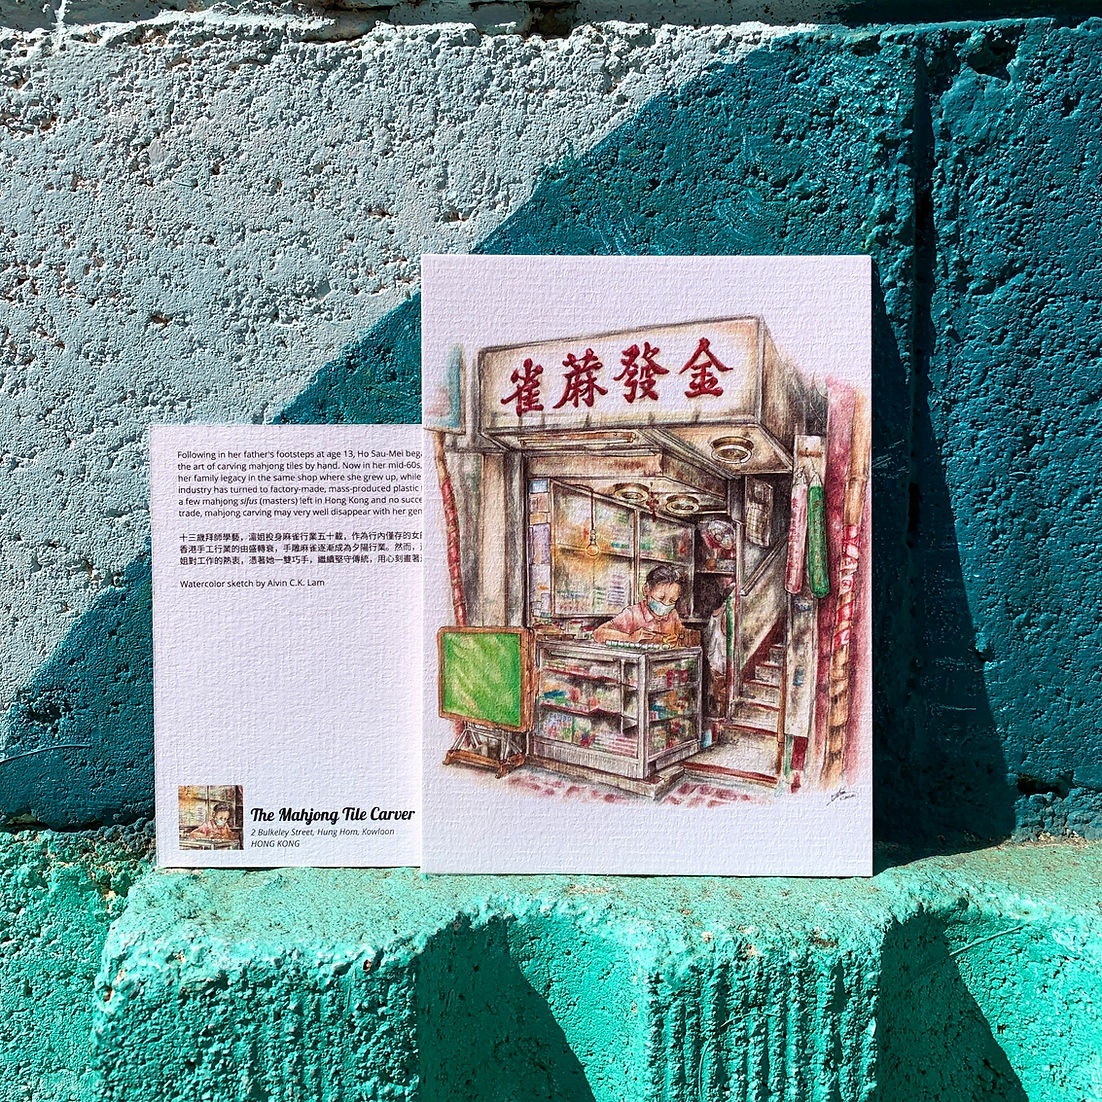 The Mahjong Tile Carver Greeting Card by Alvin Lam